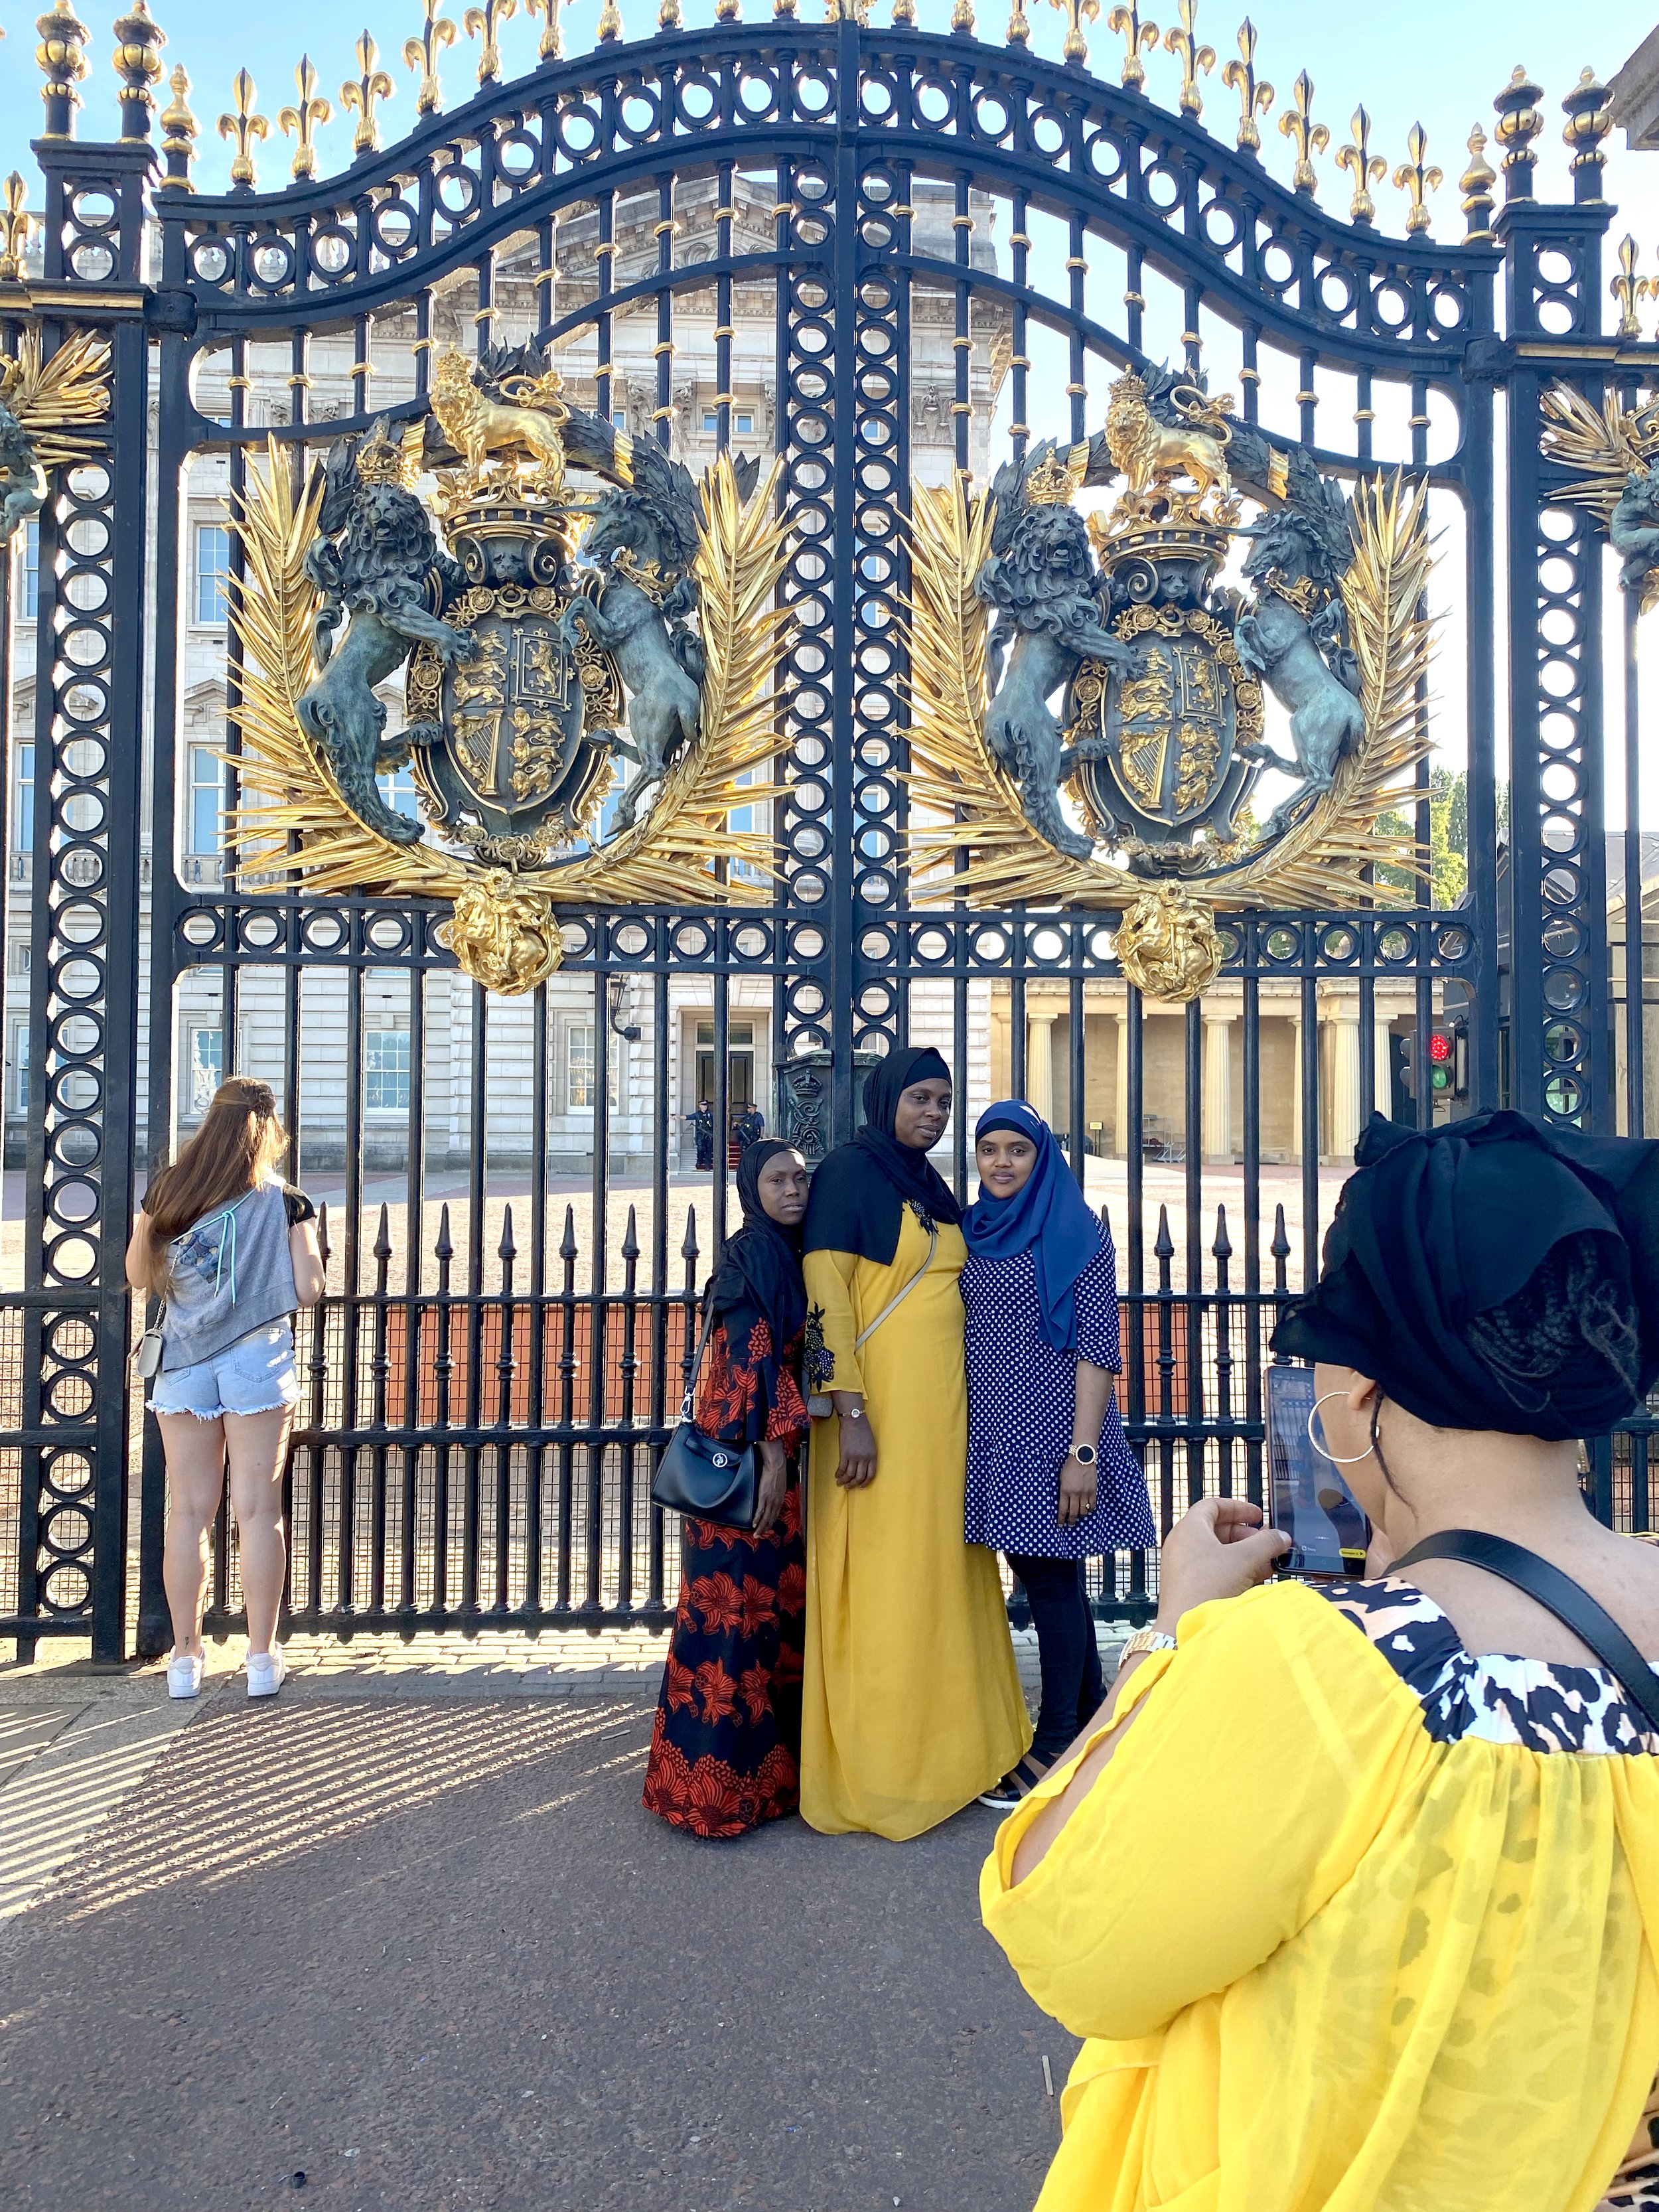  Muslim visitors talk souvenir photos at the gate to Buckingham Palace.  My mother, in particular, loved the history of the British monarchy.  She was born a year earlier than the late Queen Elizabeth II. 